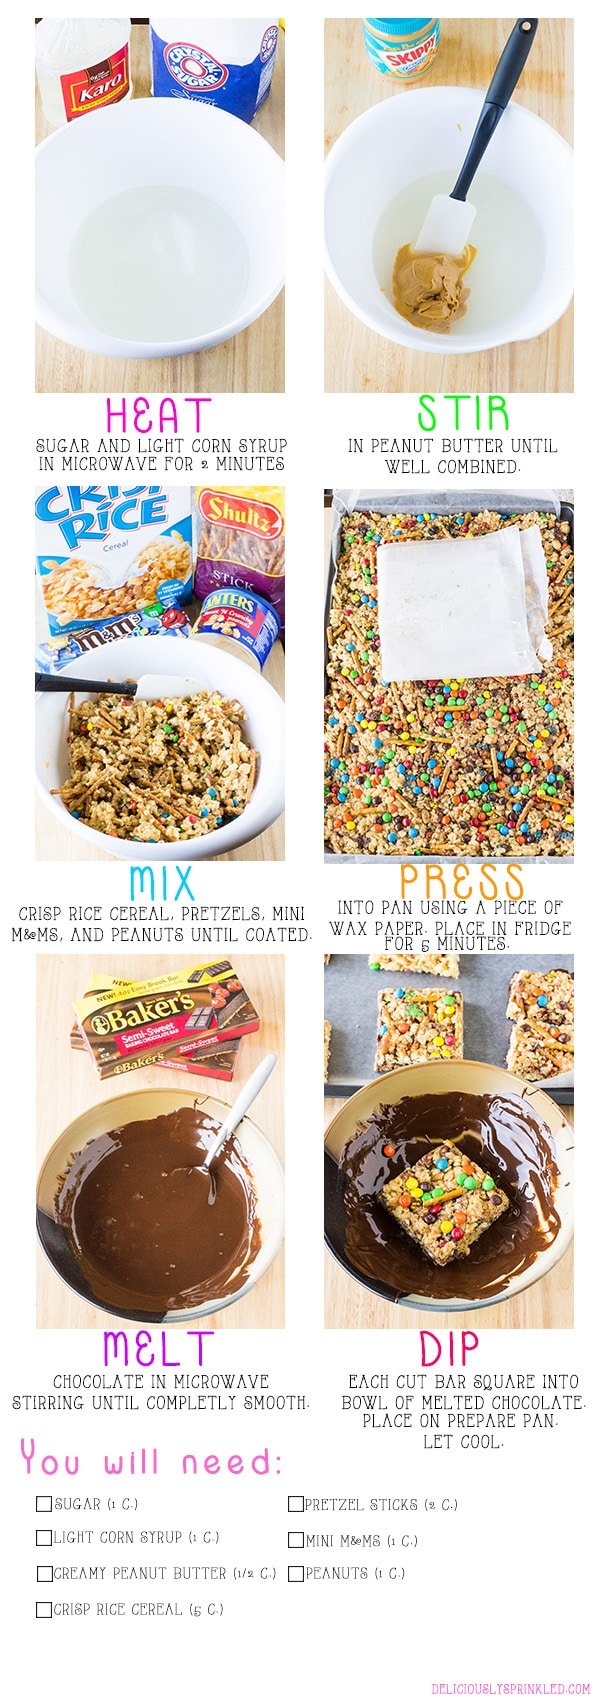 trail mix peanut butter bars visual recipe guide and shopping list